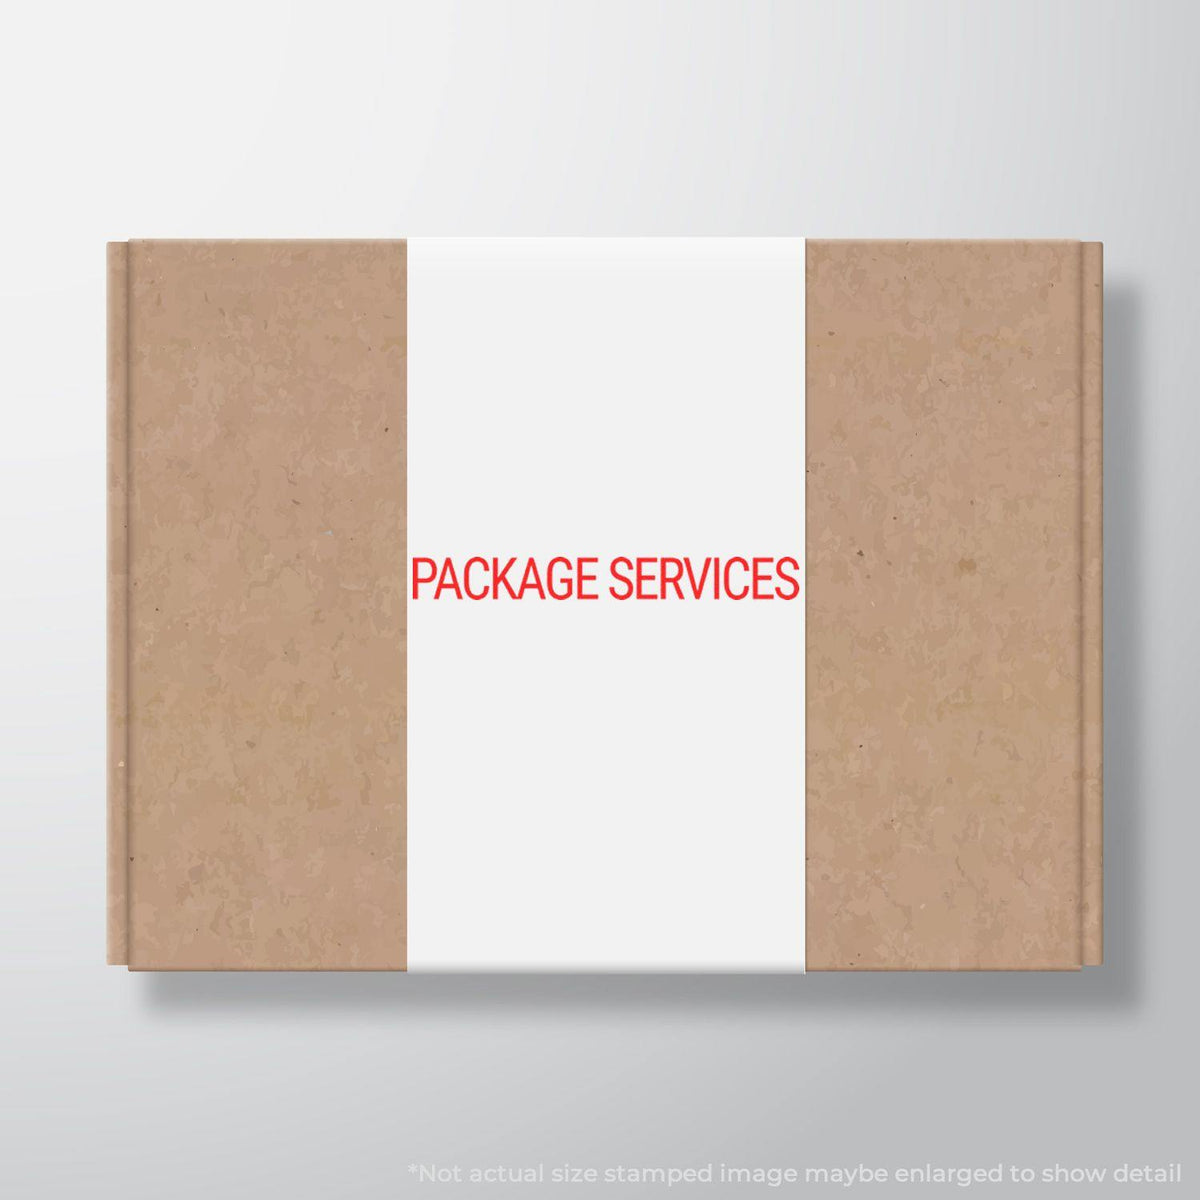 Package Services Rubber Stamp - Engineer Seal Stamps - Brand_Acorn, Impression Size_Small, Stamp Type_Regular Stamp, Type of Use_Office, Type of Use_Postal &amp; Mailing, Type of Use_Shipping &amp; Receiving